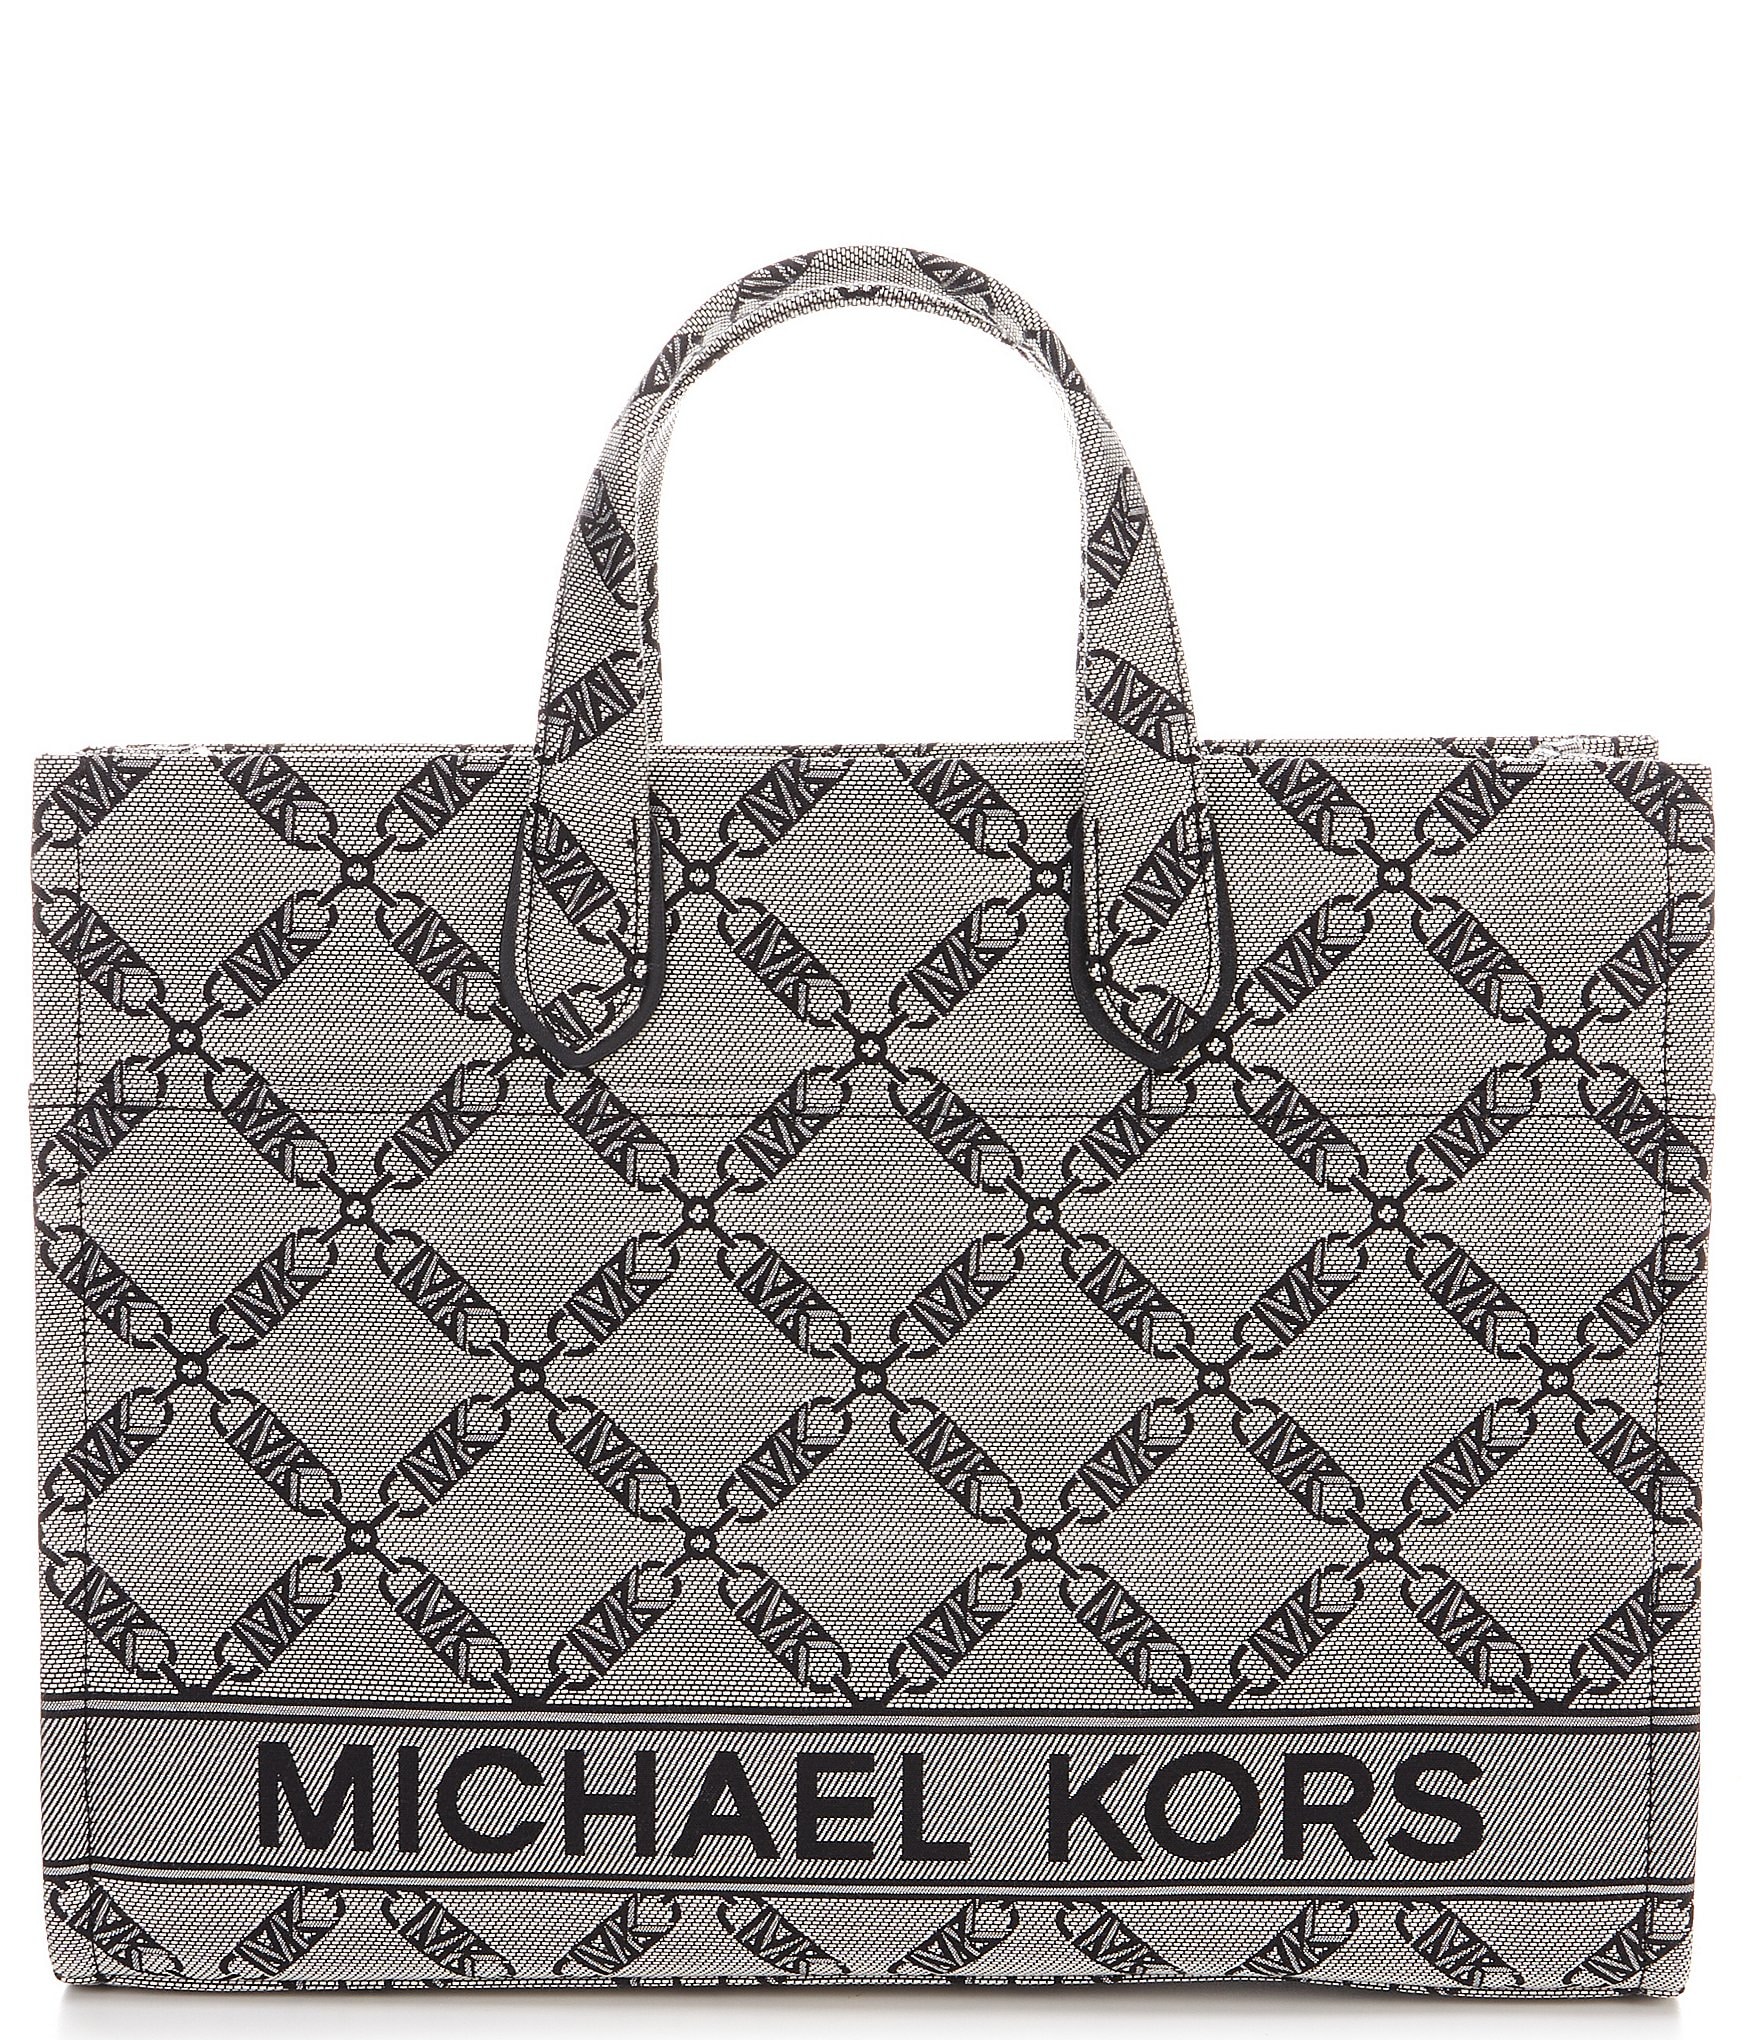 Michael Kors Large Leather Tote Bags Only $99.99 Shipped on Zulily  (Regularly $228)